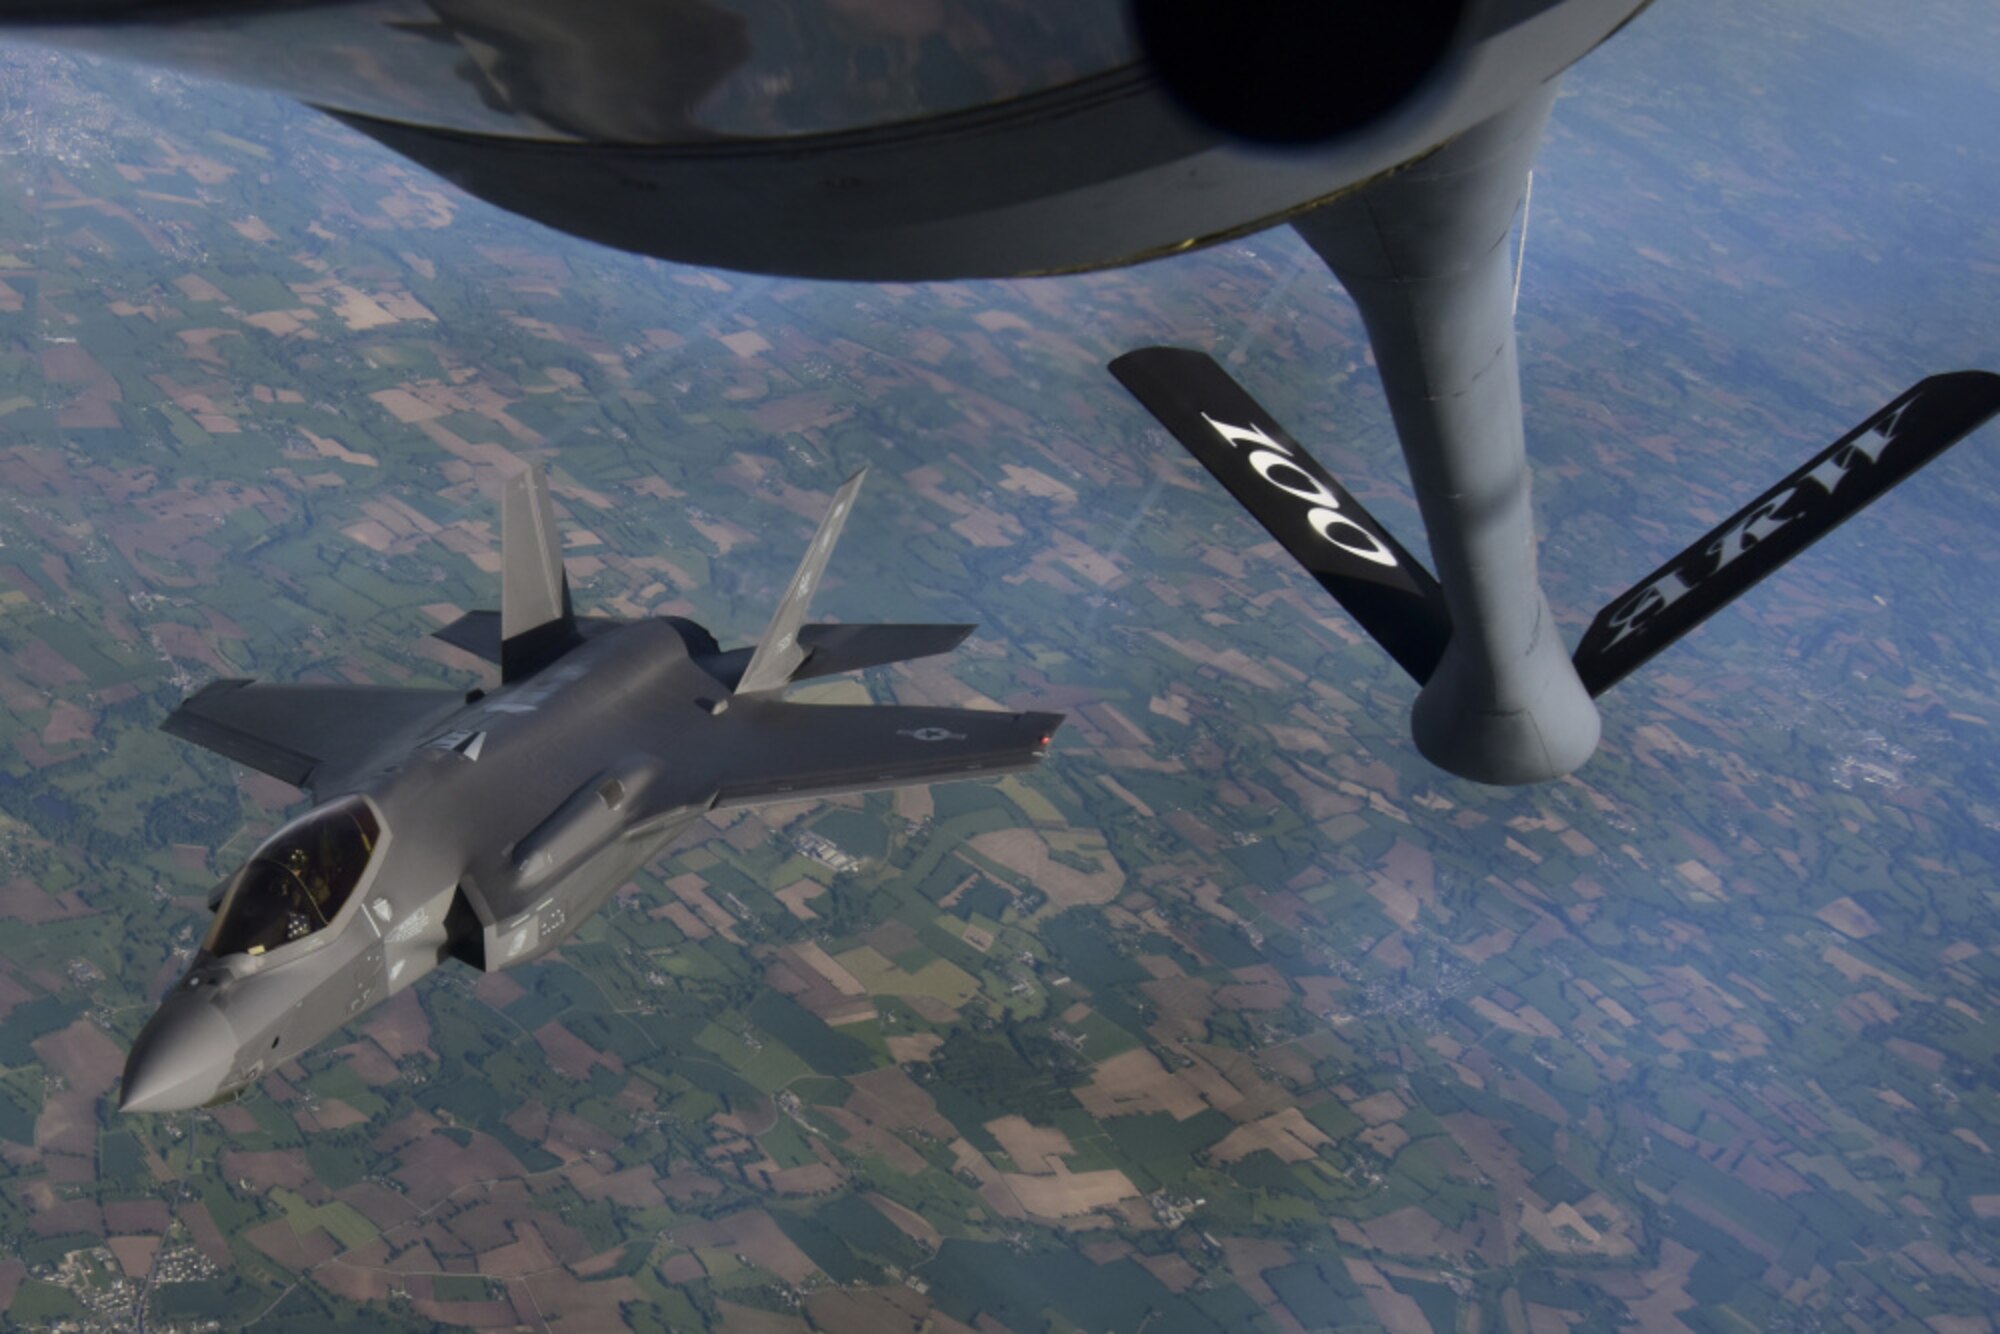 Two U.S. Air Force F-35A Lightning II aircraft assigned to the 4th Fighter Squadron, Hill Air Force Base, Utah, fly over France, May 30, 2021. The F-35A provides next-generation stealth, enhanced situational awareness, and reduced vulnerability for the United States and allied nations. (U.S. Air Force photo by Master Sgt. Darnell T. Cannady)